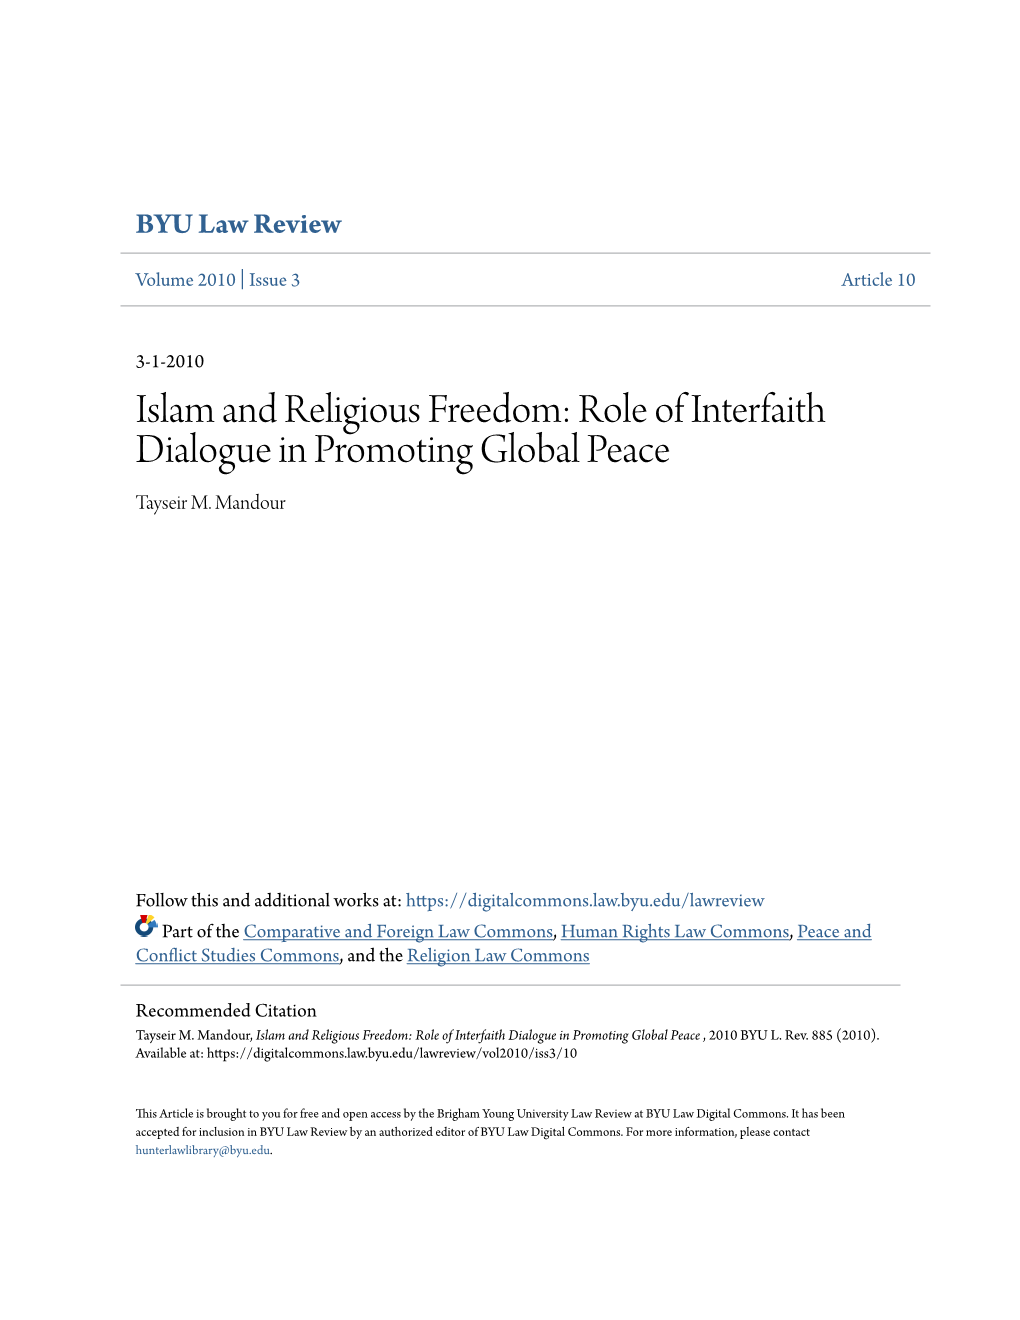 Islam and Religious Freedom: Role of Interfaith Dialogue in Promoting Global Peace Tayseir M